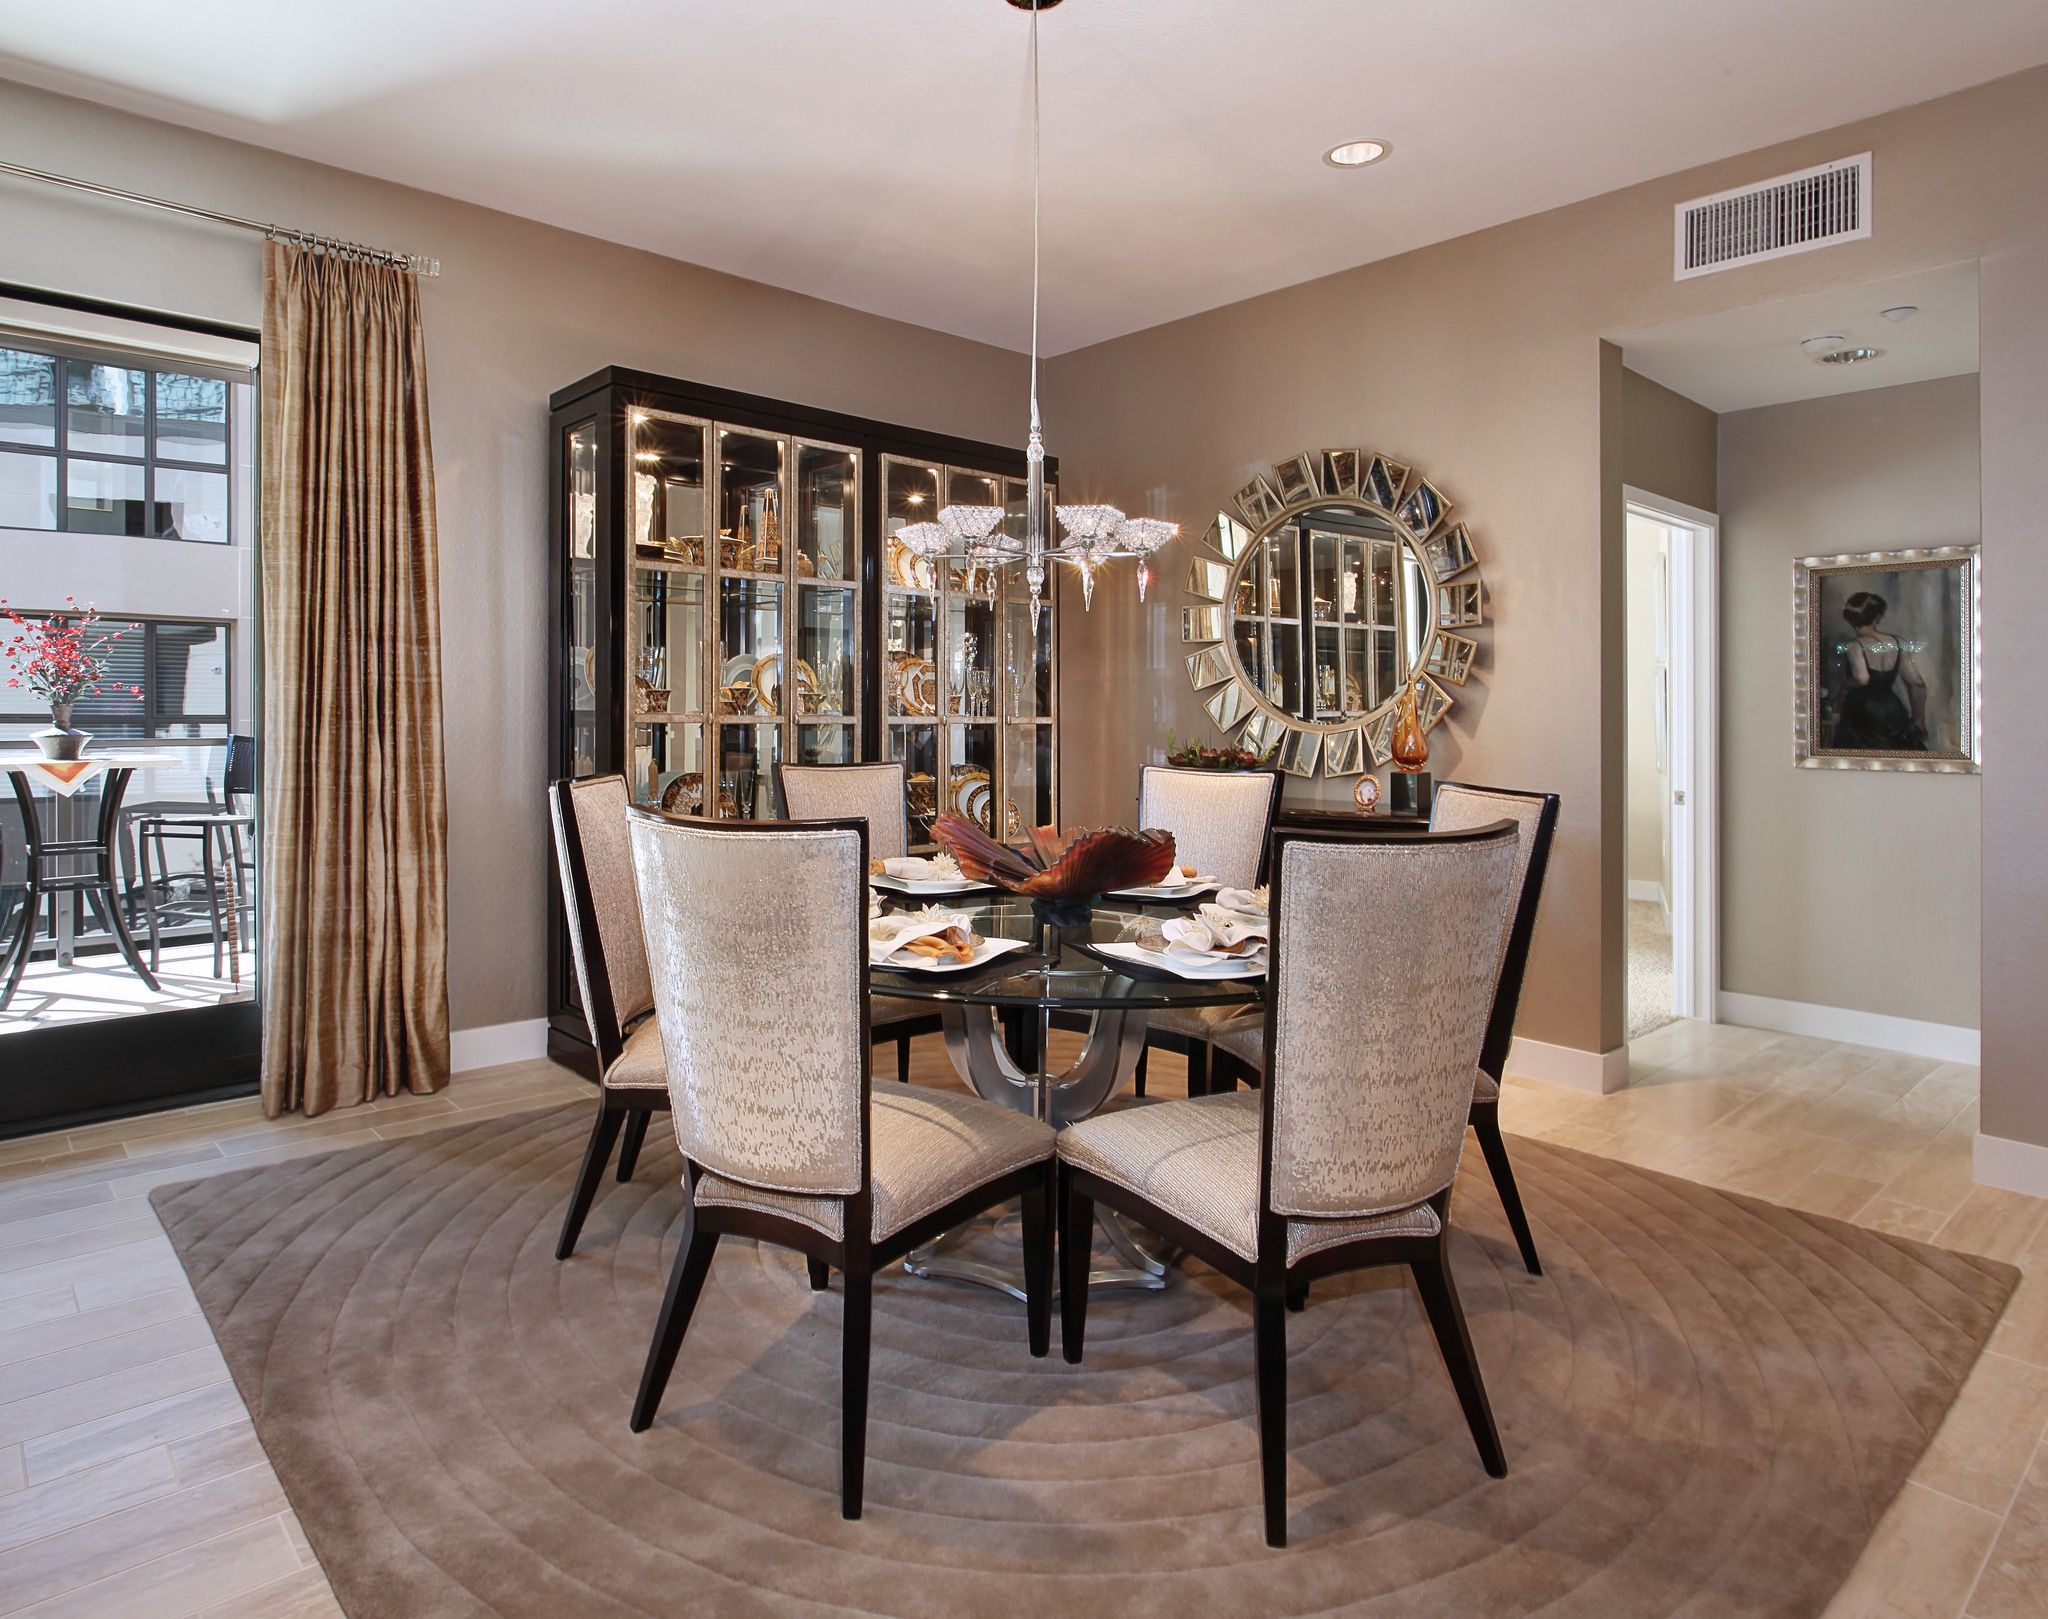 Do You Use Your Formal Dining Room